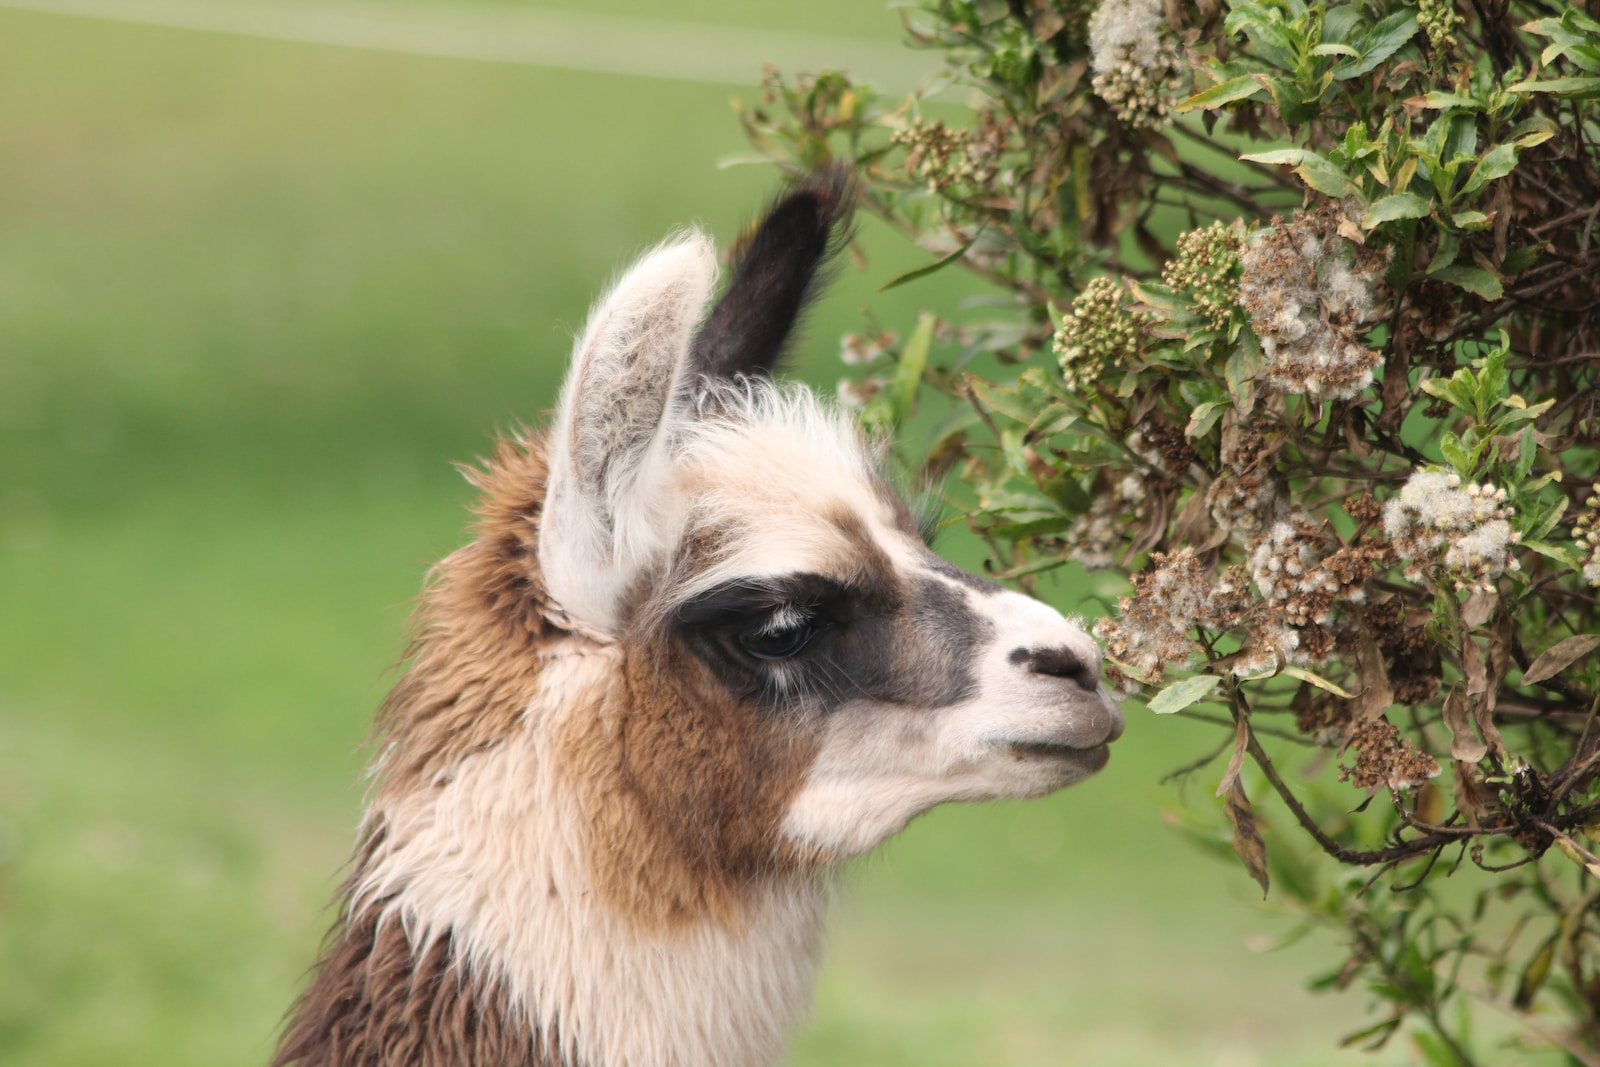 white and brown animal near green leaf plant during daytime llama charlotte international airport proxy